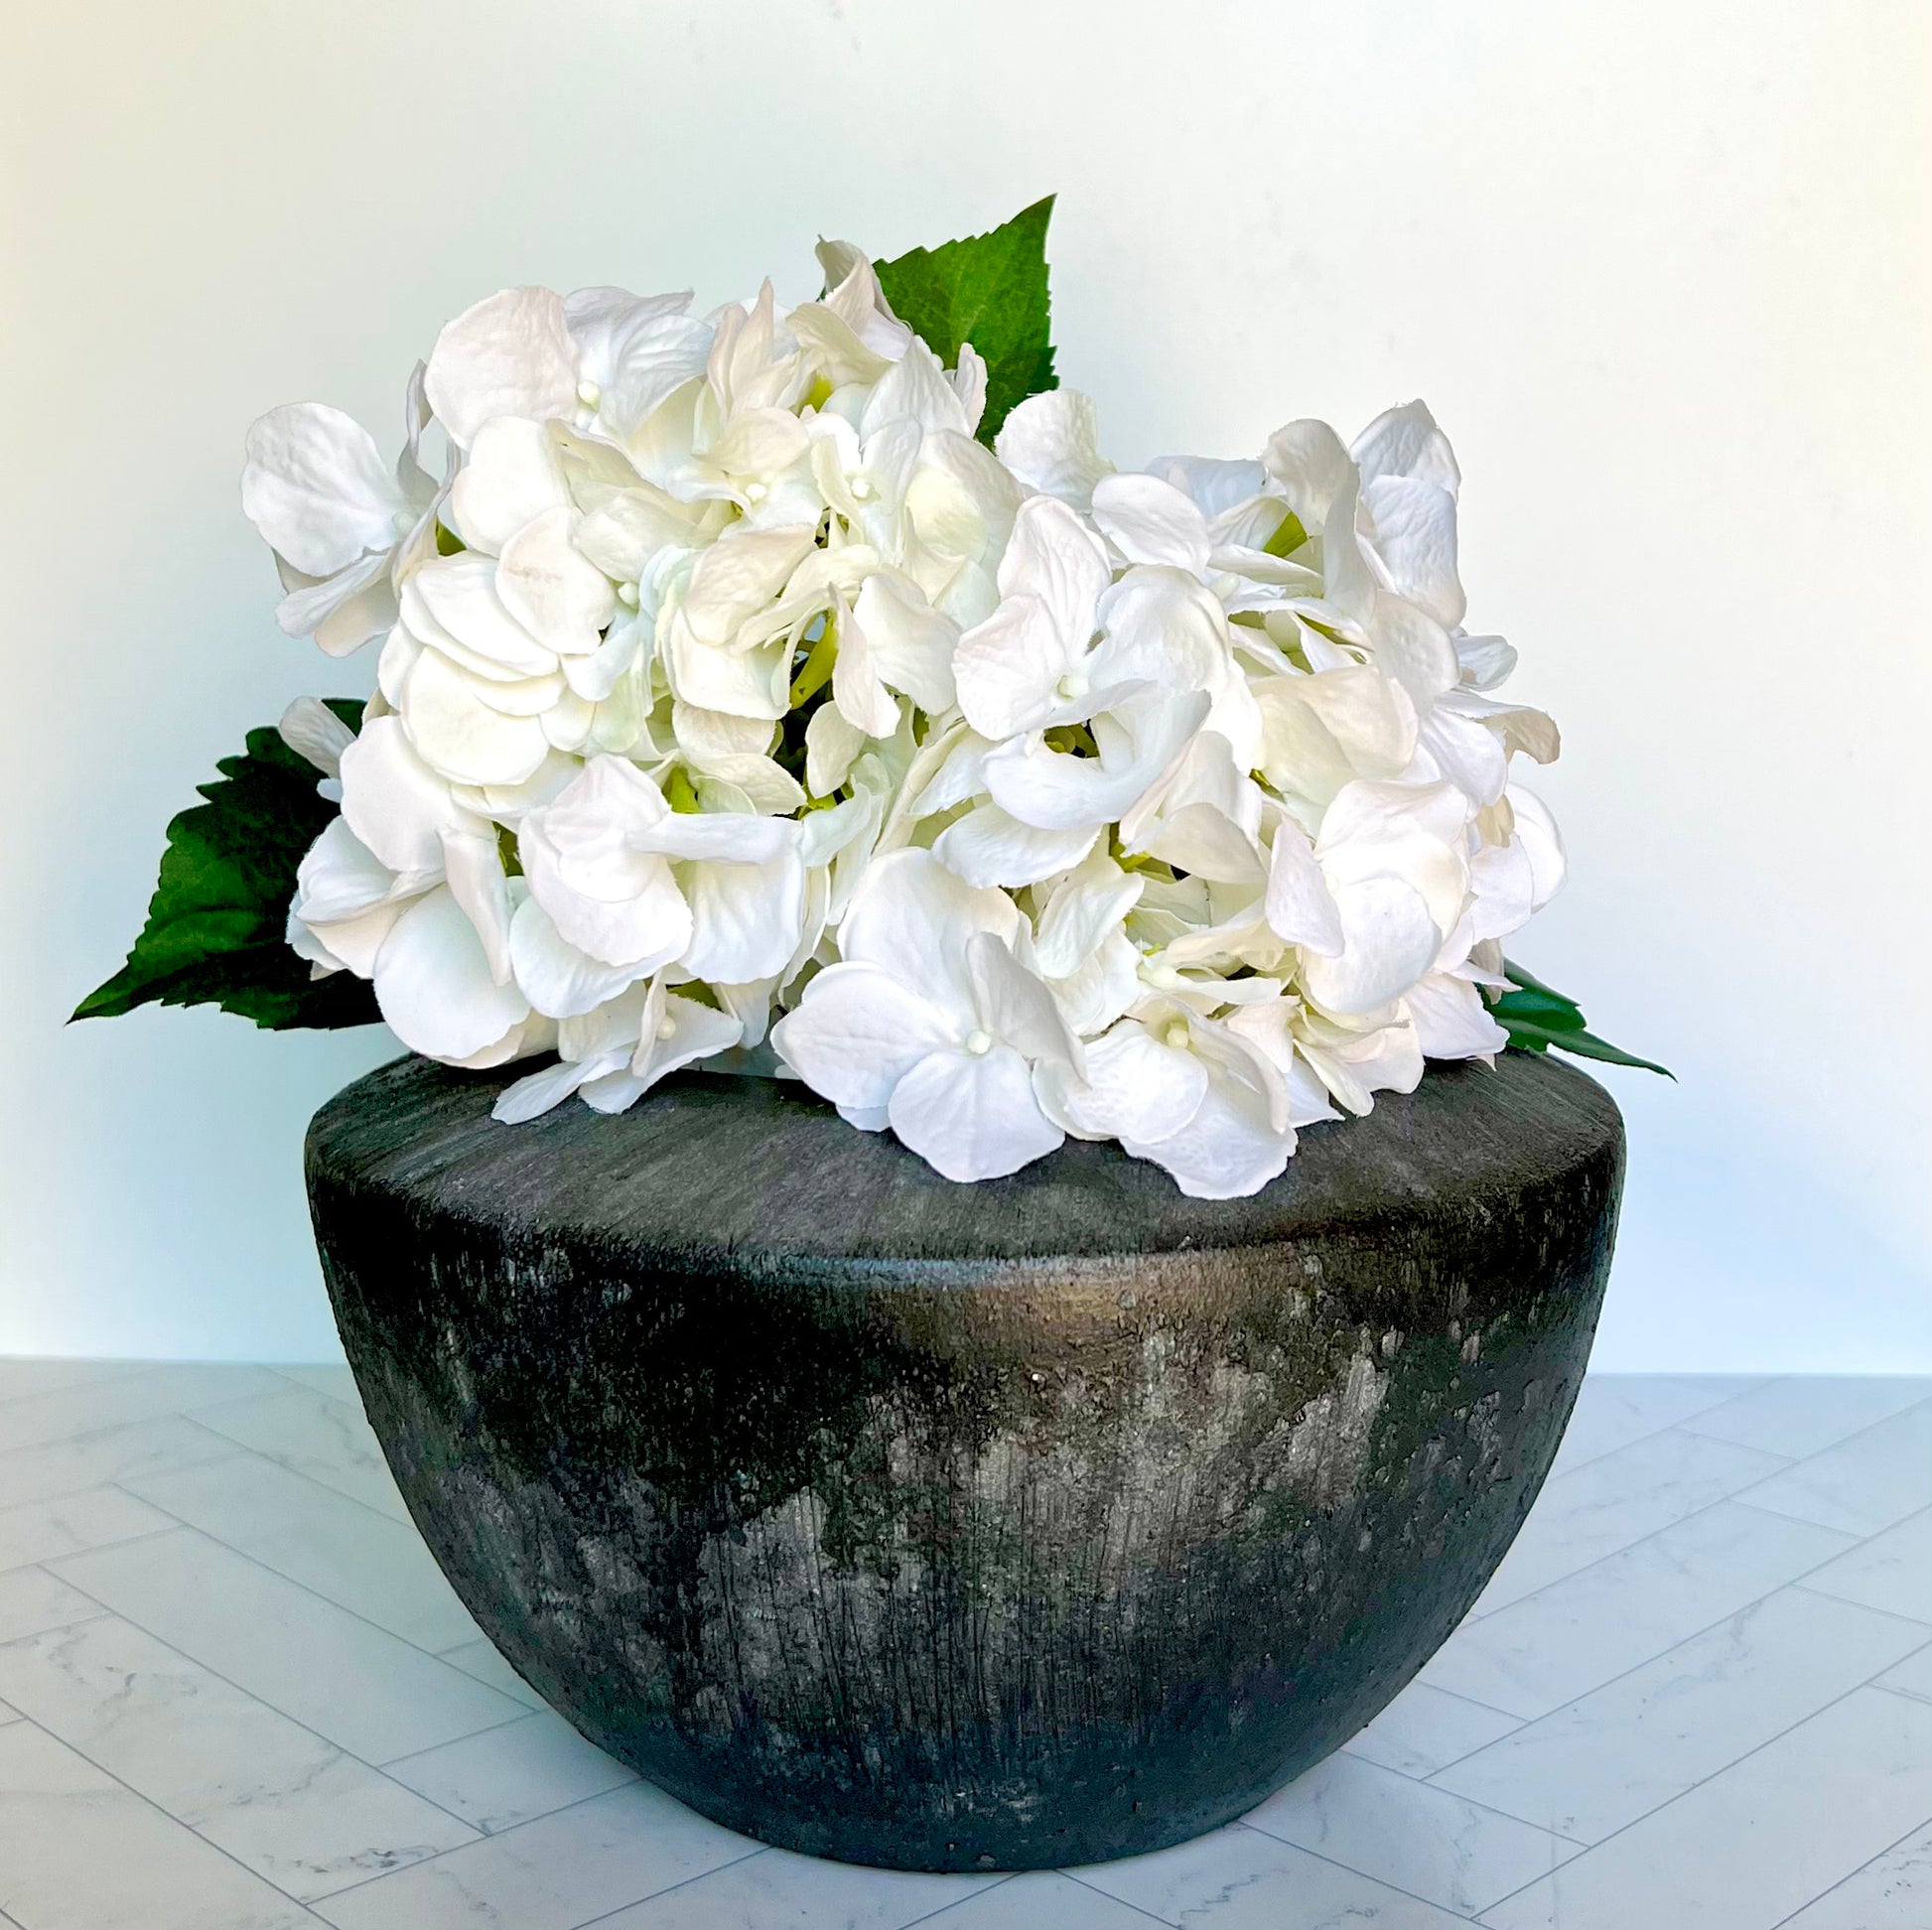 A Patina Planter on a white surfacefilled with white hydrangea blossoms